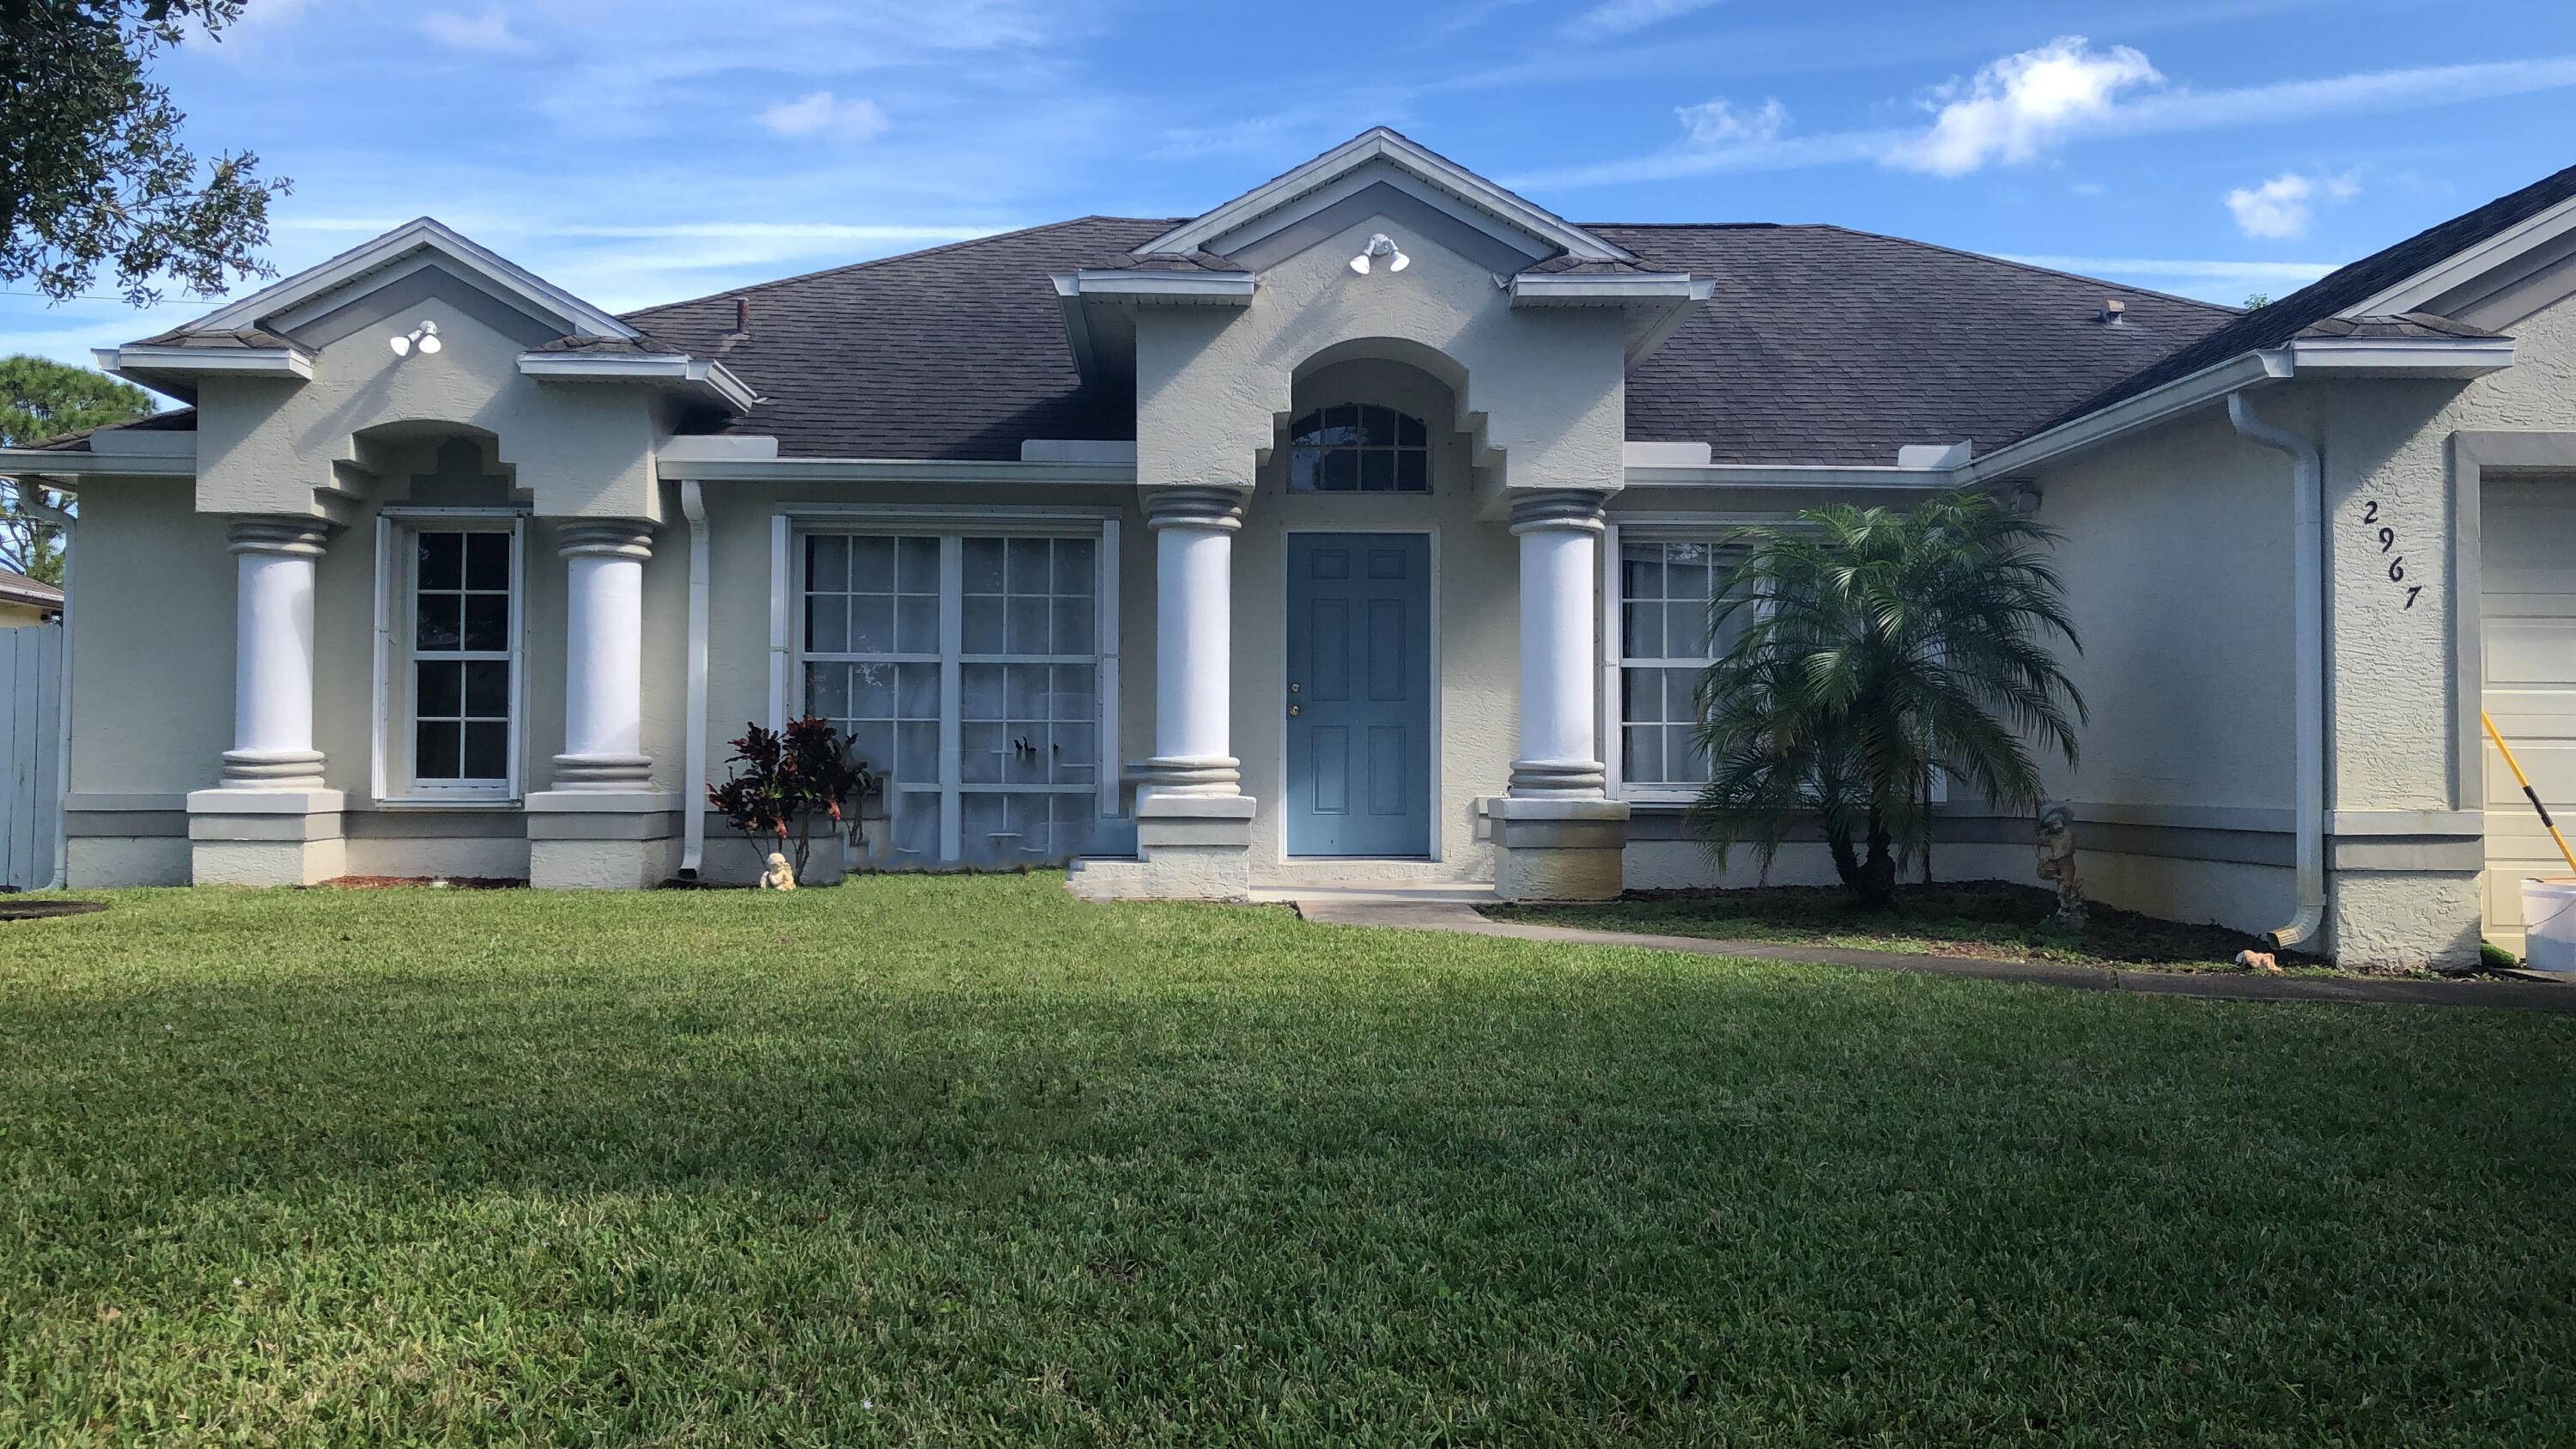 Beautiful 4 bed 2 bath Single Family Home is located in the heart of Port Saint Lucie.